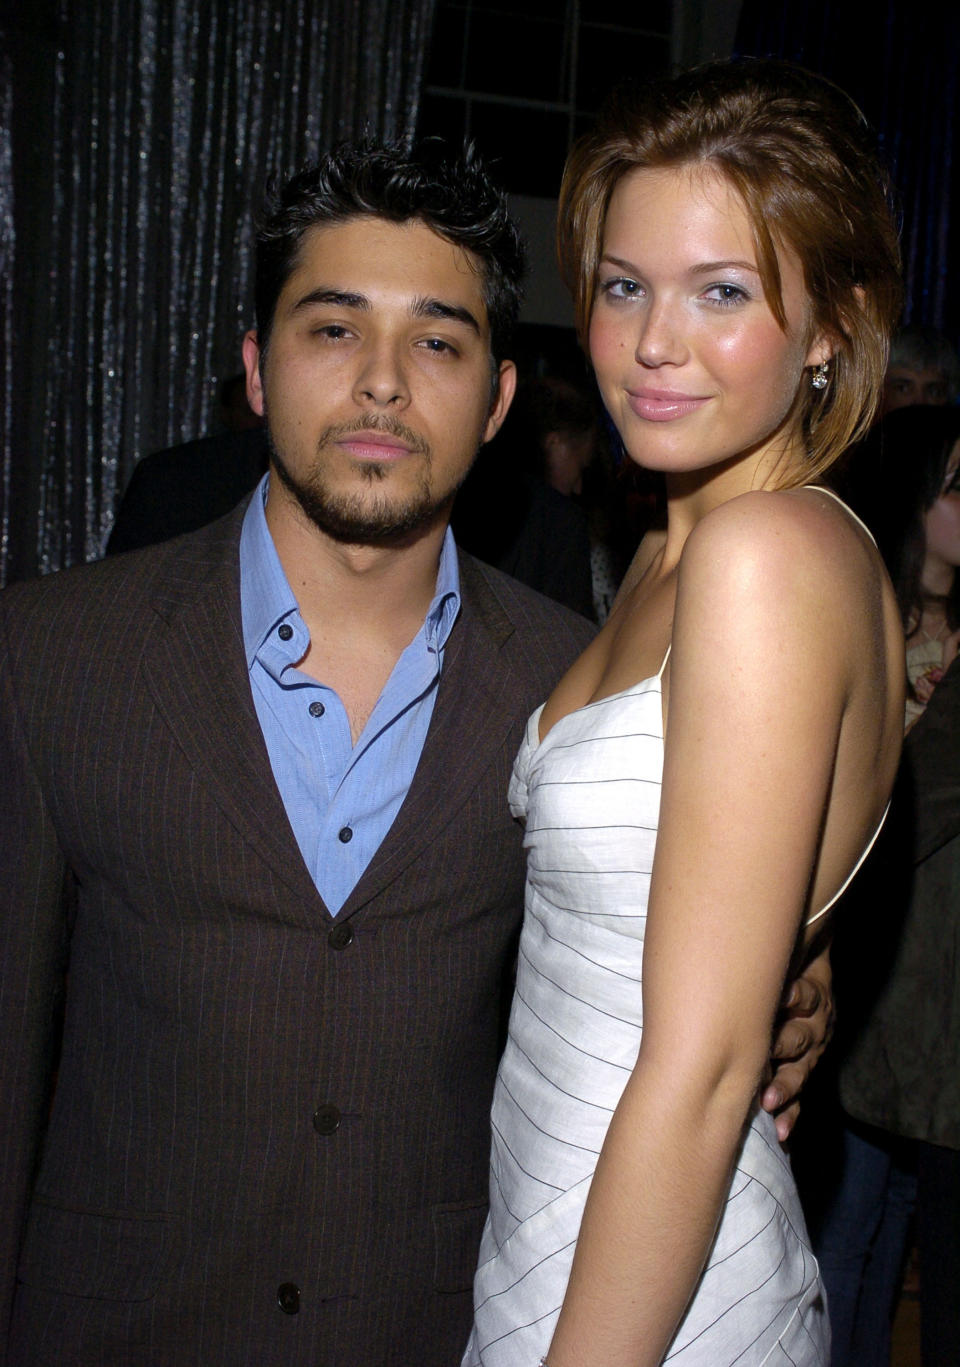 Wilmer Valderrama and Mandy Moore at a party together